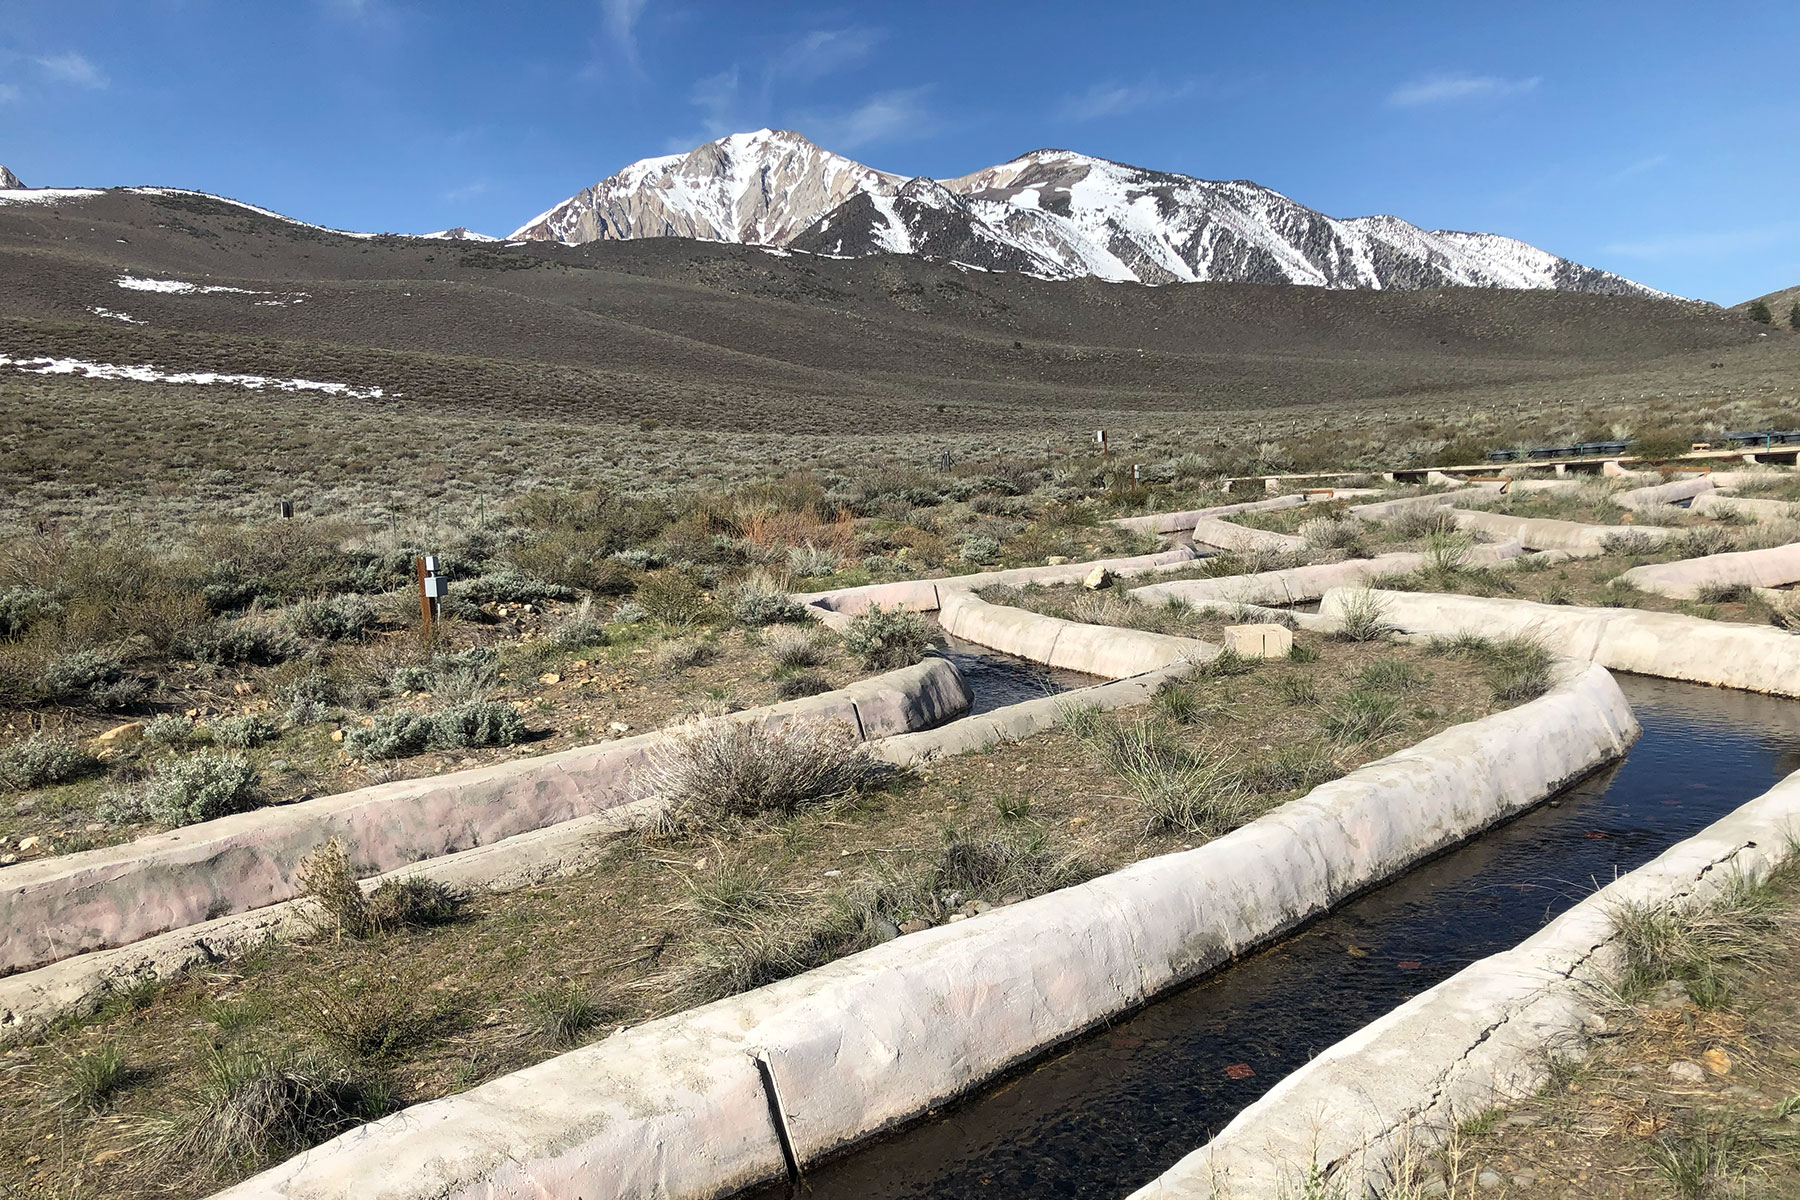 A series of three, one-meter wide concrete channels zig-zag across a dry, grassy mountainside of California’s Eastern Sierra Nevada. The snowy peak of a mountain is visible in the background. 